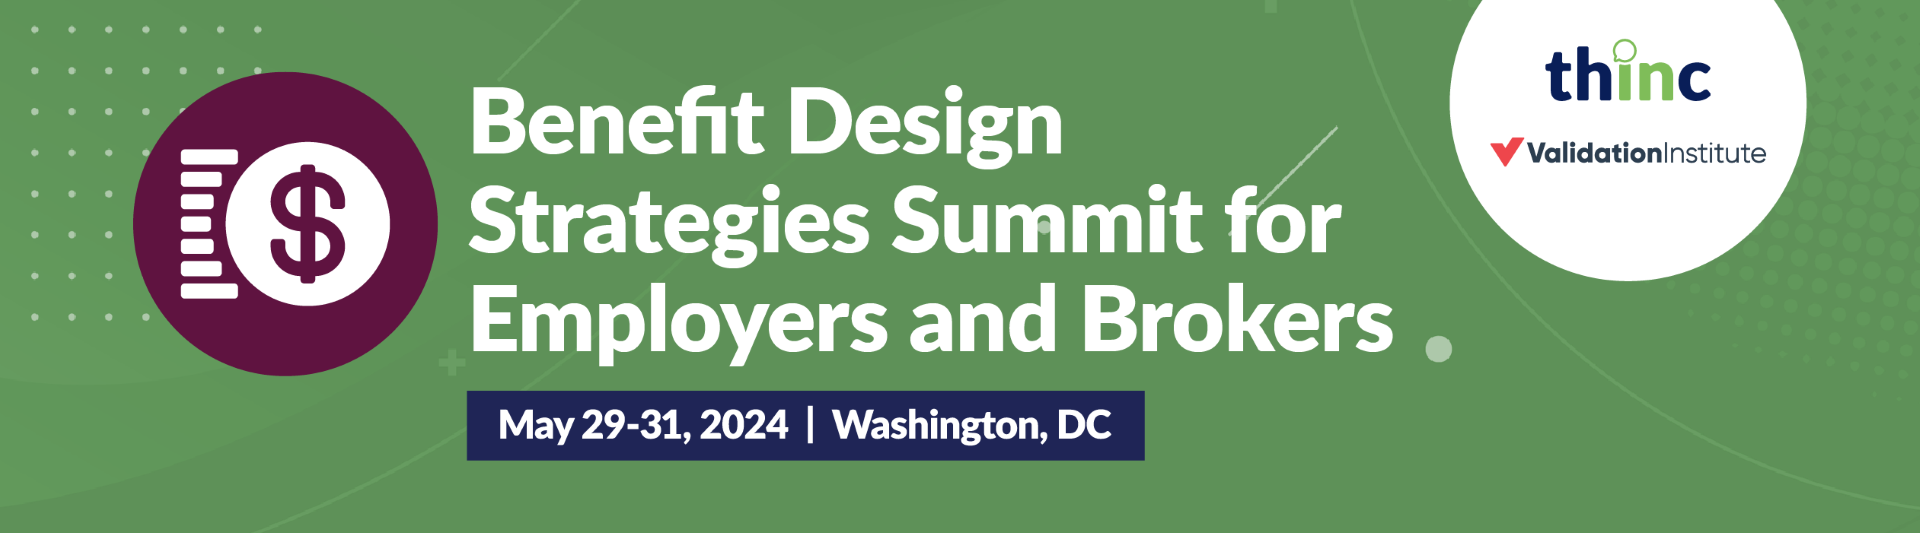 Benefit Design Strategies Summit for Employers and Brokers